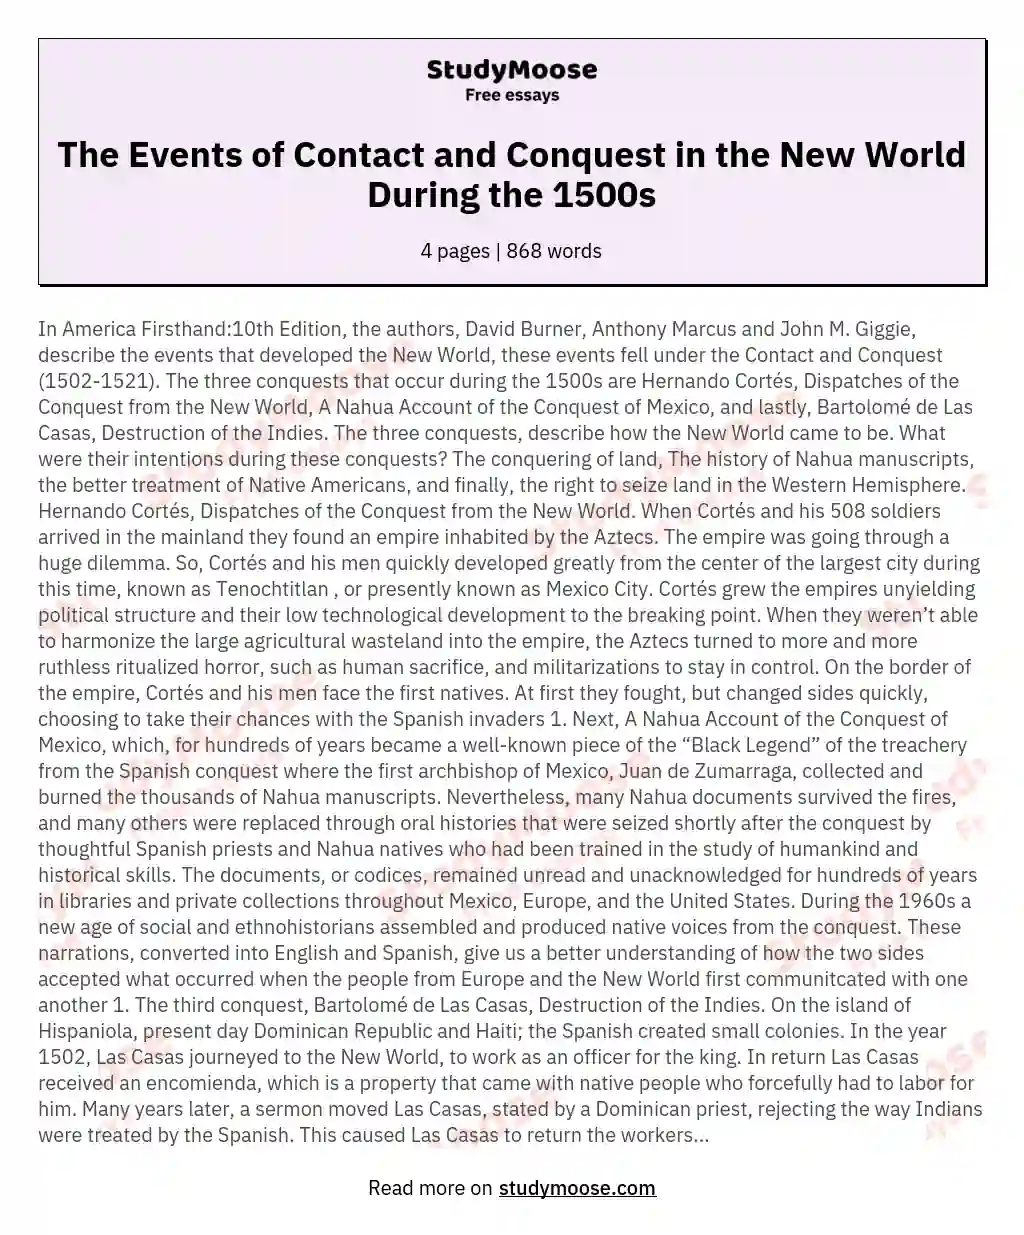 The Events of Contact and Conquest in the New World During the 1500s essay